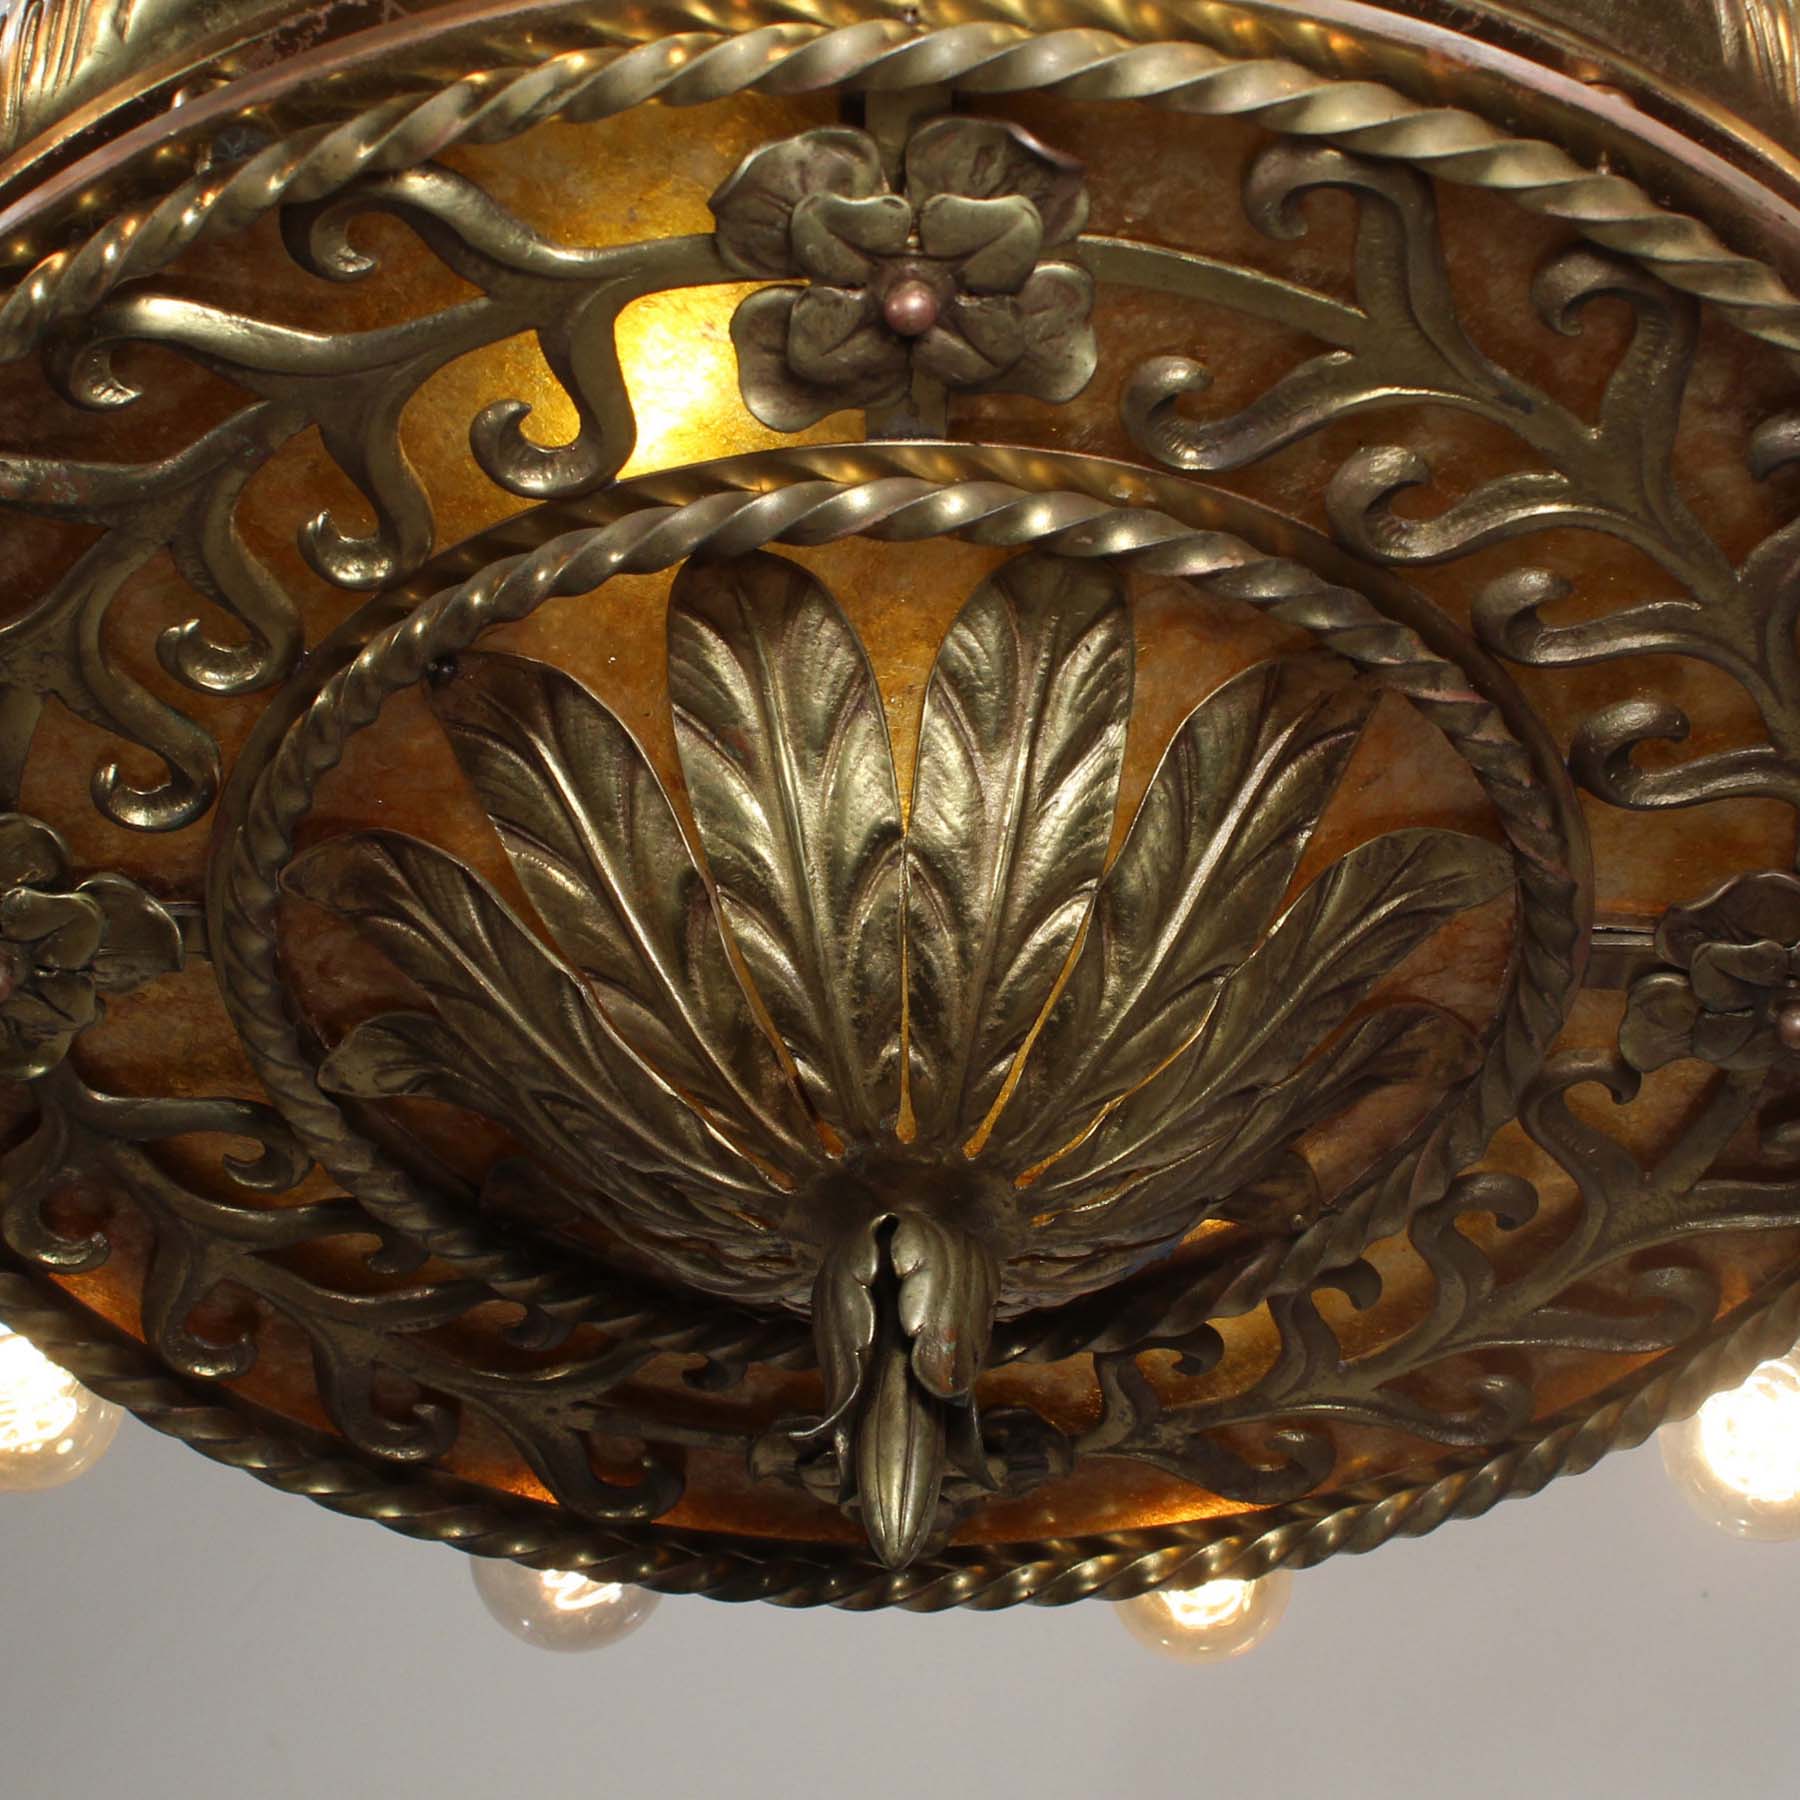 SOLD Substantial Antique Brass Chandelier with Mica -69301